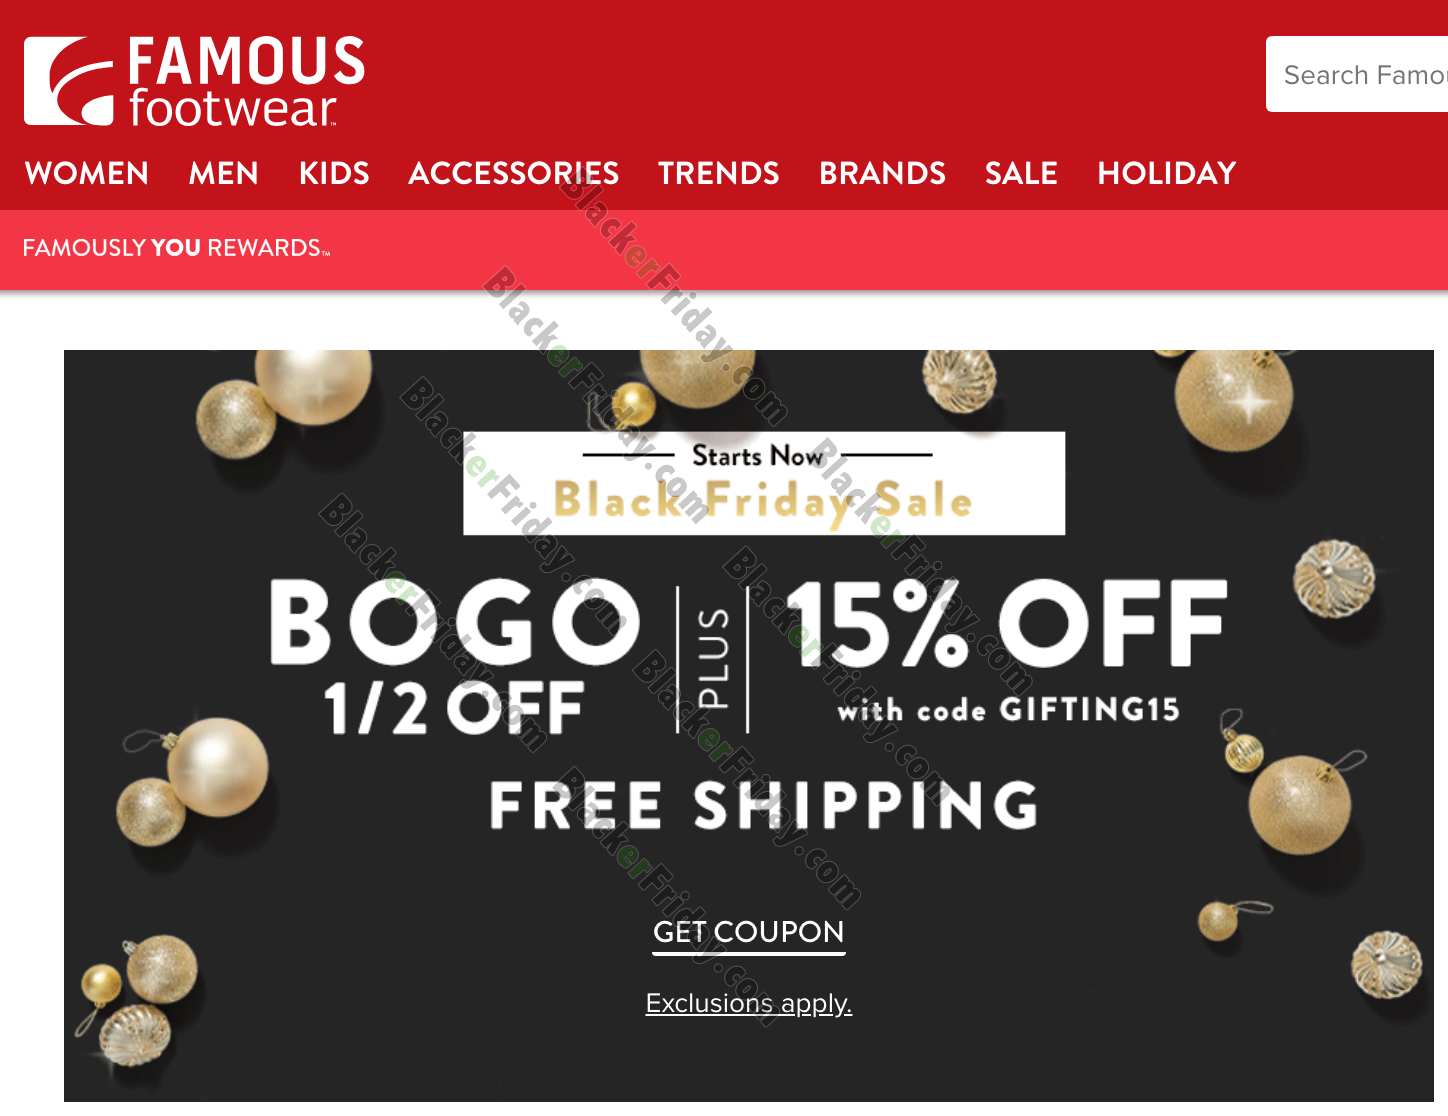 Famous Footwear Black Friday 2021 Sale What To Expect Blacker Friday